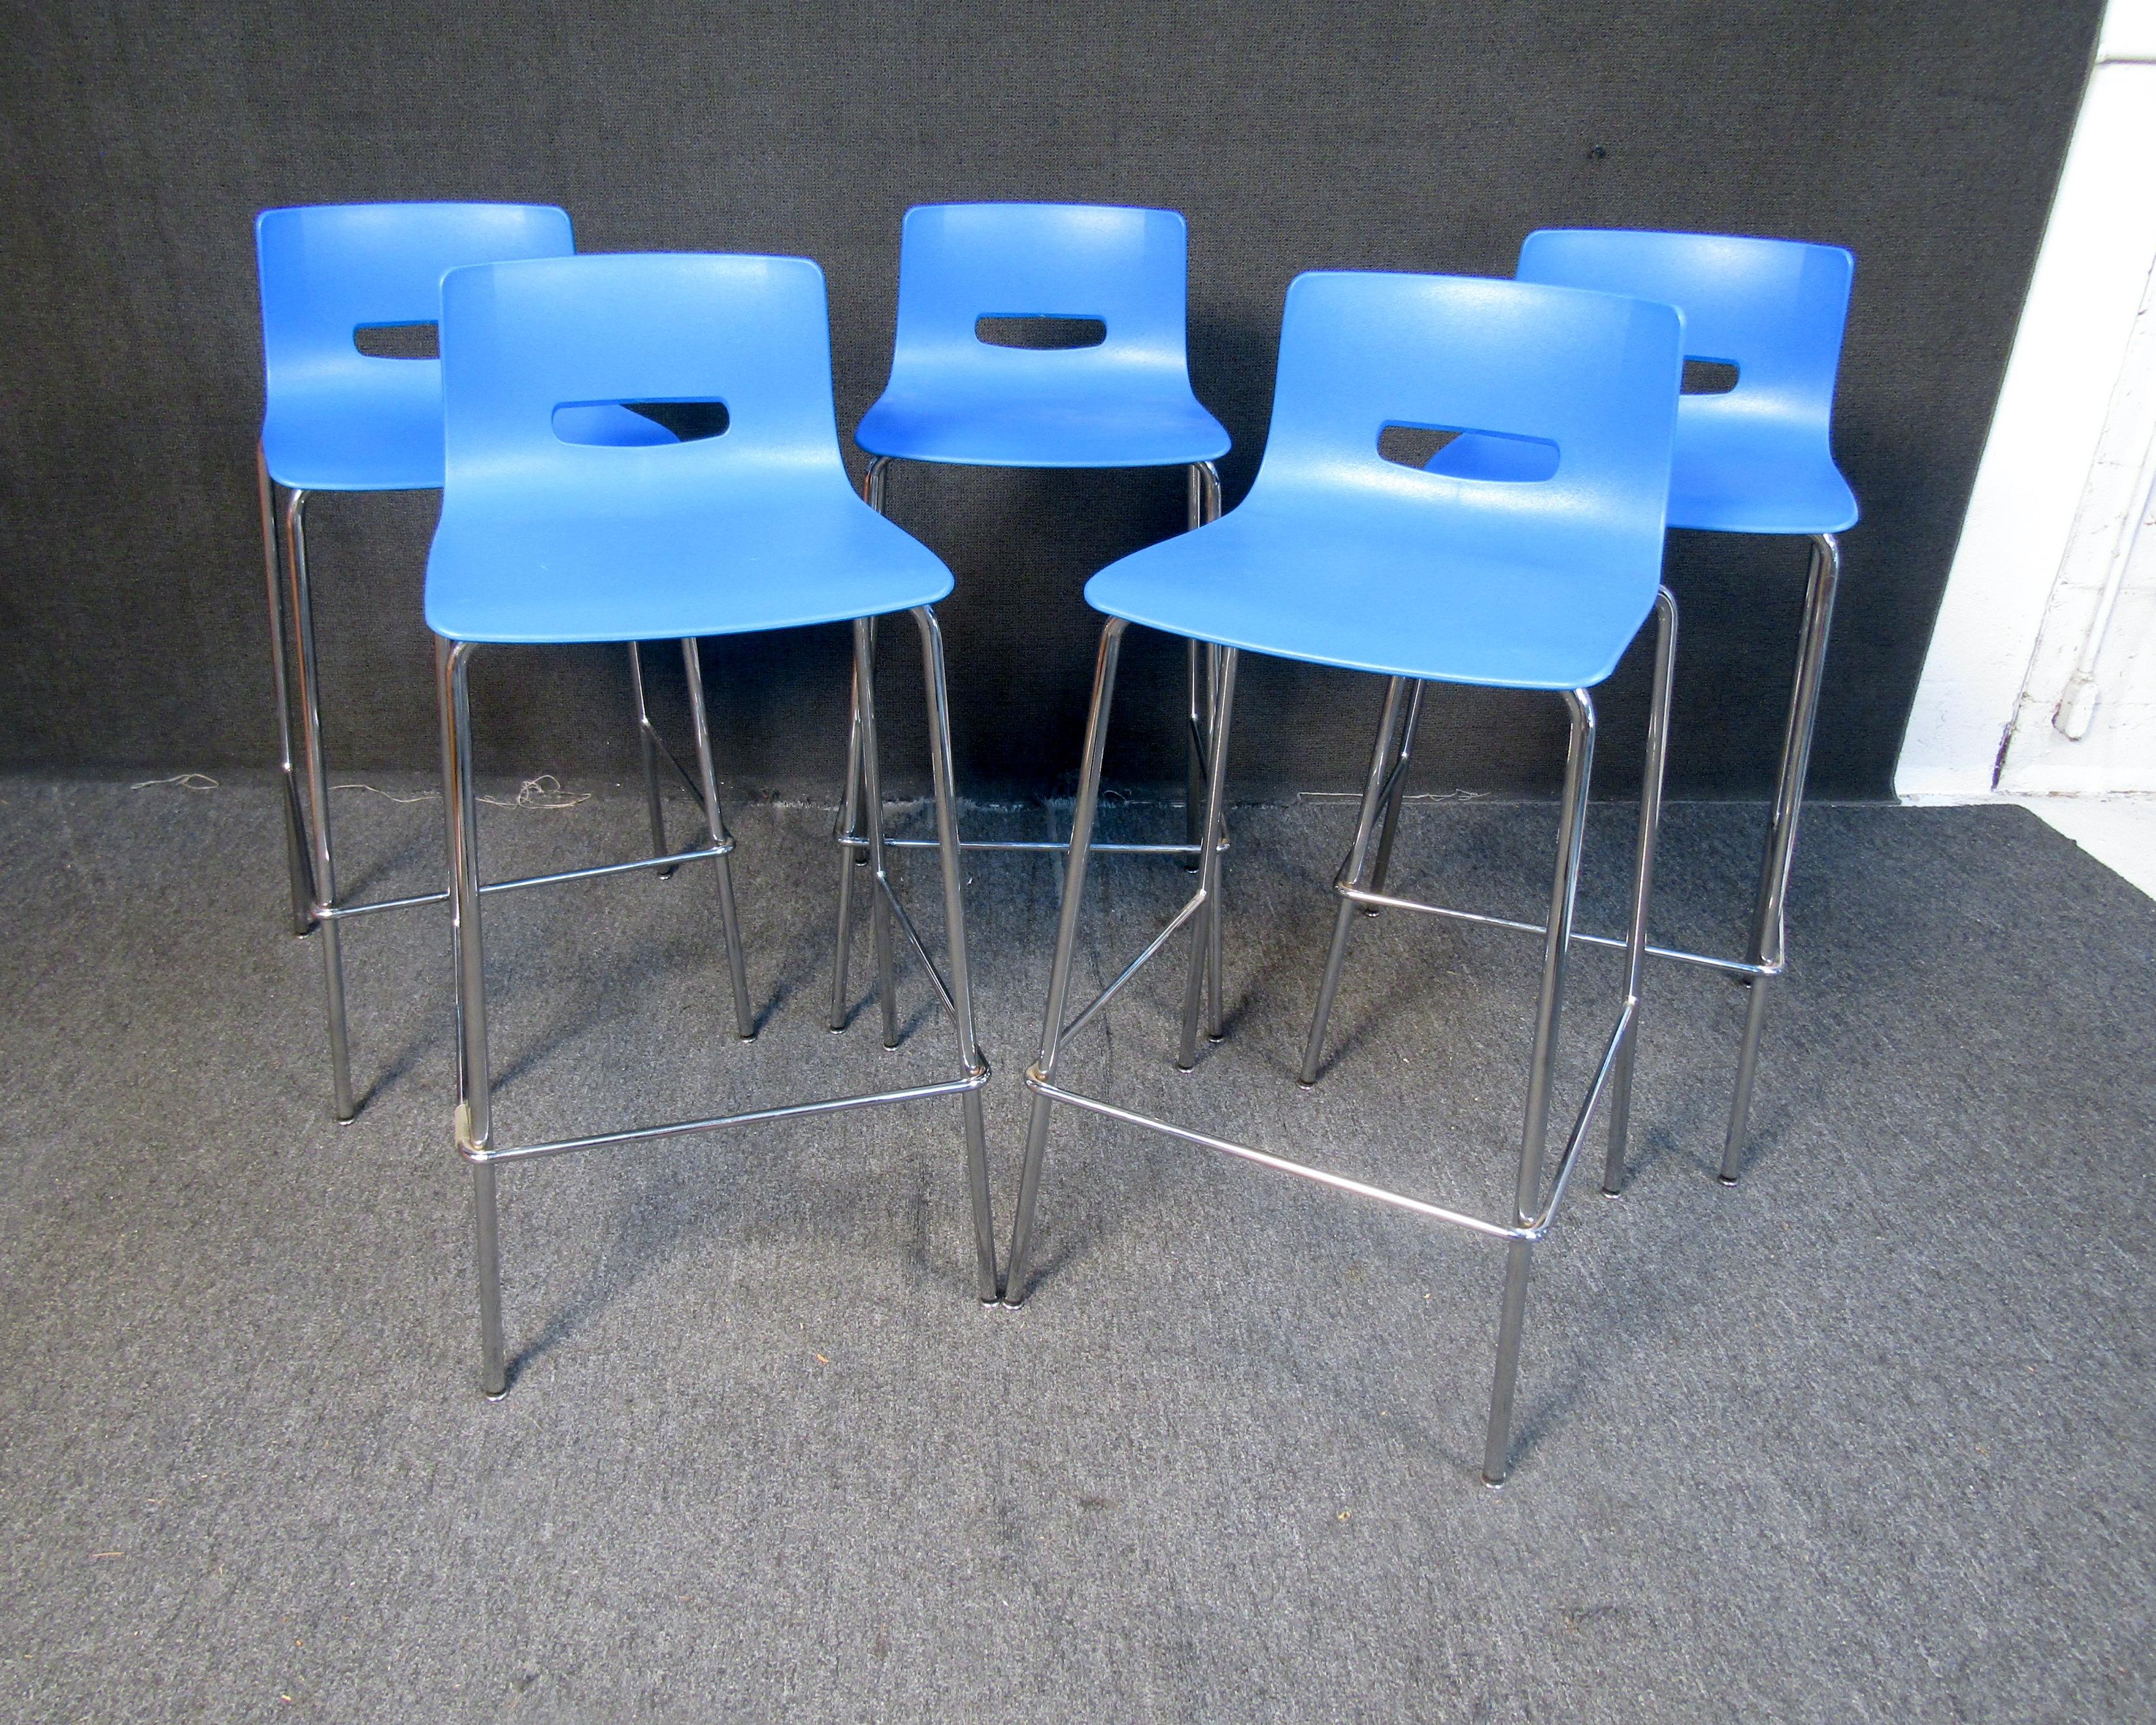 Set of (5) sleek contemporary blue bar stools. These chairs feature contoured back rests, tall metal legs and foot rests. If you have a bar or high table in need of a modern set of stools, these could be a perfect addition. Please confirm item